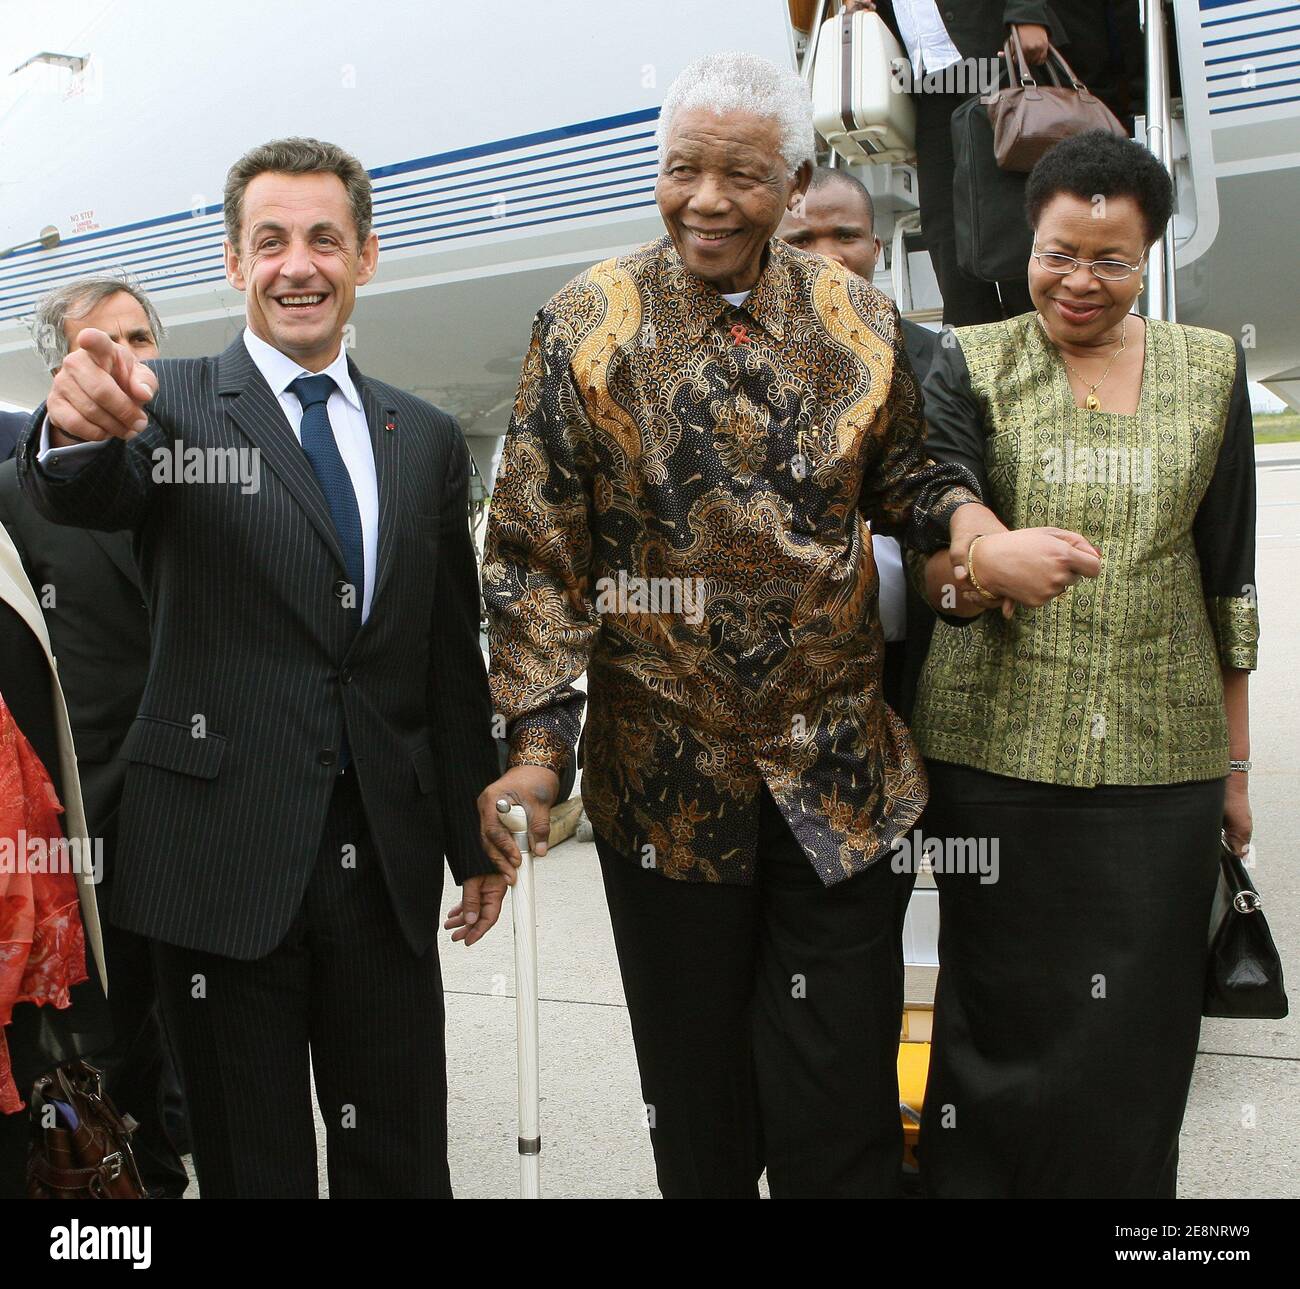 President Nicolas Sarkozy (l) welcomes former South African president Nelson Mandela and his wife upon their arrival at Orly airport, near Paris, France on September 3, 2007. The 89-year-old Nobel Peace Prize winner Mandela spent 27 years in prison before being freed in 1990, going on to become South Africa's first black leader in 1994 after the fall of apartheid. He received last week a hero's welcome in London, where a statue of him was unveiled opposite the Houses of Parliament. Photo by Thomas Coex/Pool/ABACAPRESS.COM Stock Photo